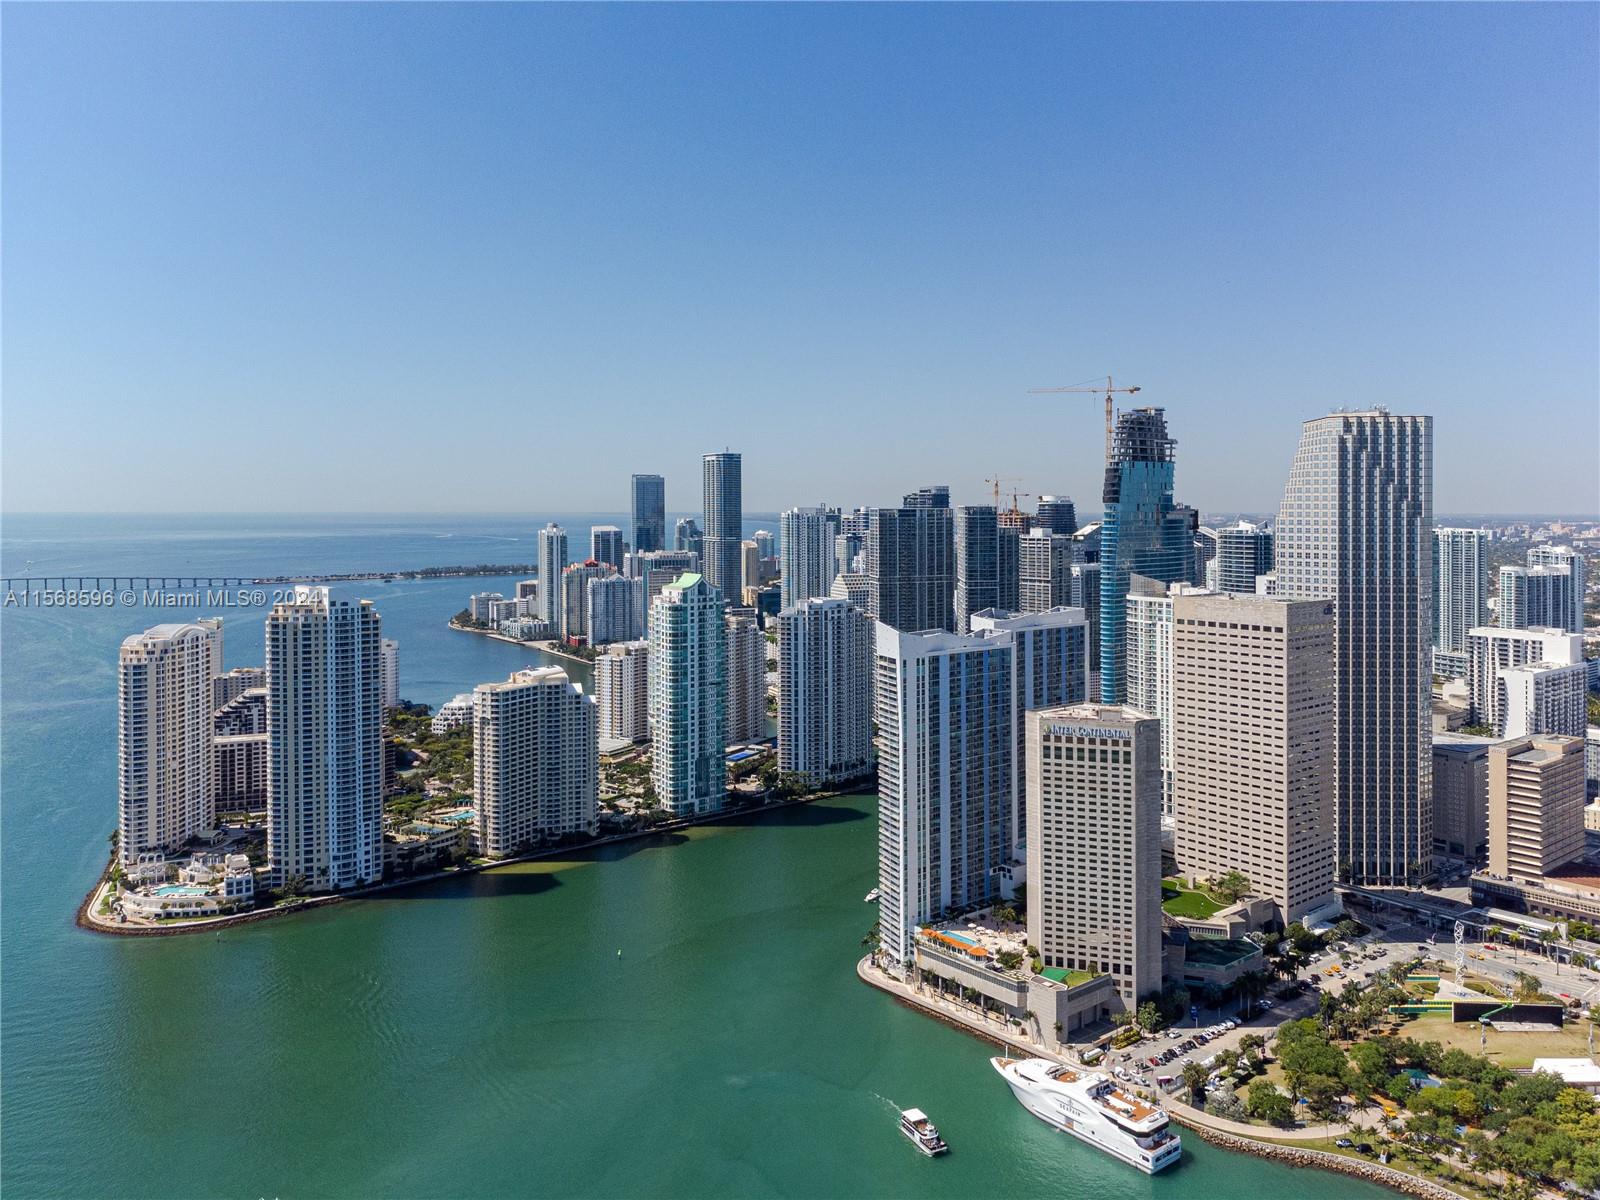 Beautiful 2 BEDROOM, 2 Bath, Updated CORNER UNIT - Breathtaking views of Biscayne Bay. Granite countertop, Washer and Dryer. Walk-in master closet. One Miami East is conveniently located a short walk to Bayfront Park, Metro mover, Wholefoods and all other downtown/Brickell shops and restaurants. Guard-gated building with 24/7 front desk security. Gorgeous lobby and multiple pools, gym, and other amenities. Amazing! Note-Pools and jacuzzi are under remodeling. Assigned/Valet parking. Tenant occupied until May 8th. 24h notice required. Please text LA or use Showing Assist.